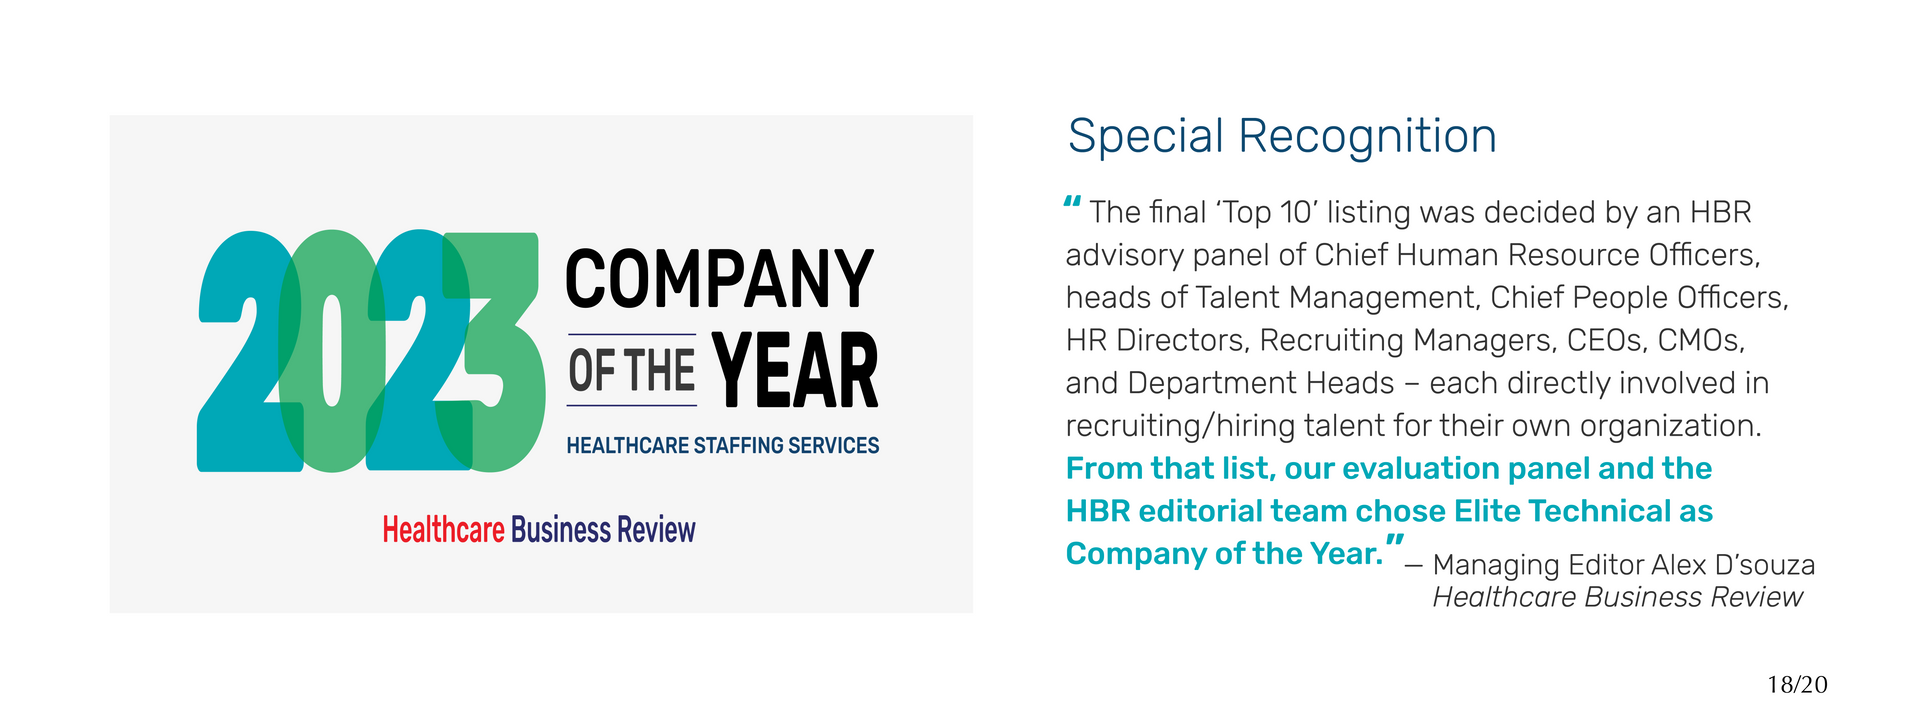 Elite Technical named Company of the Year by Healthcare Business Review